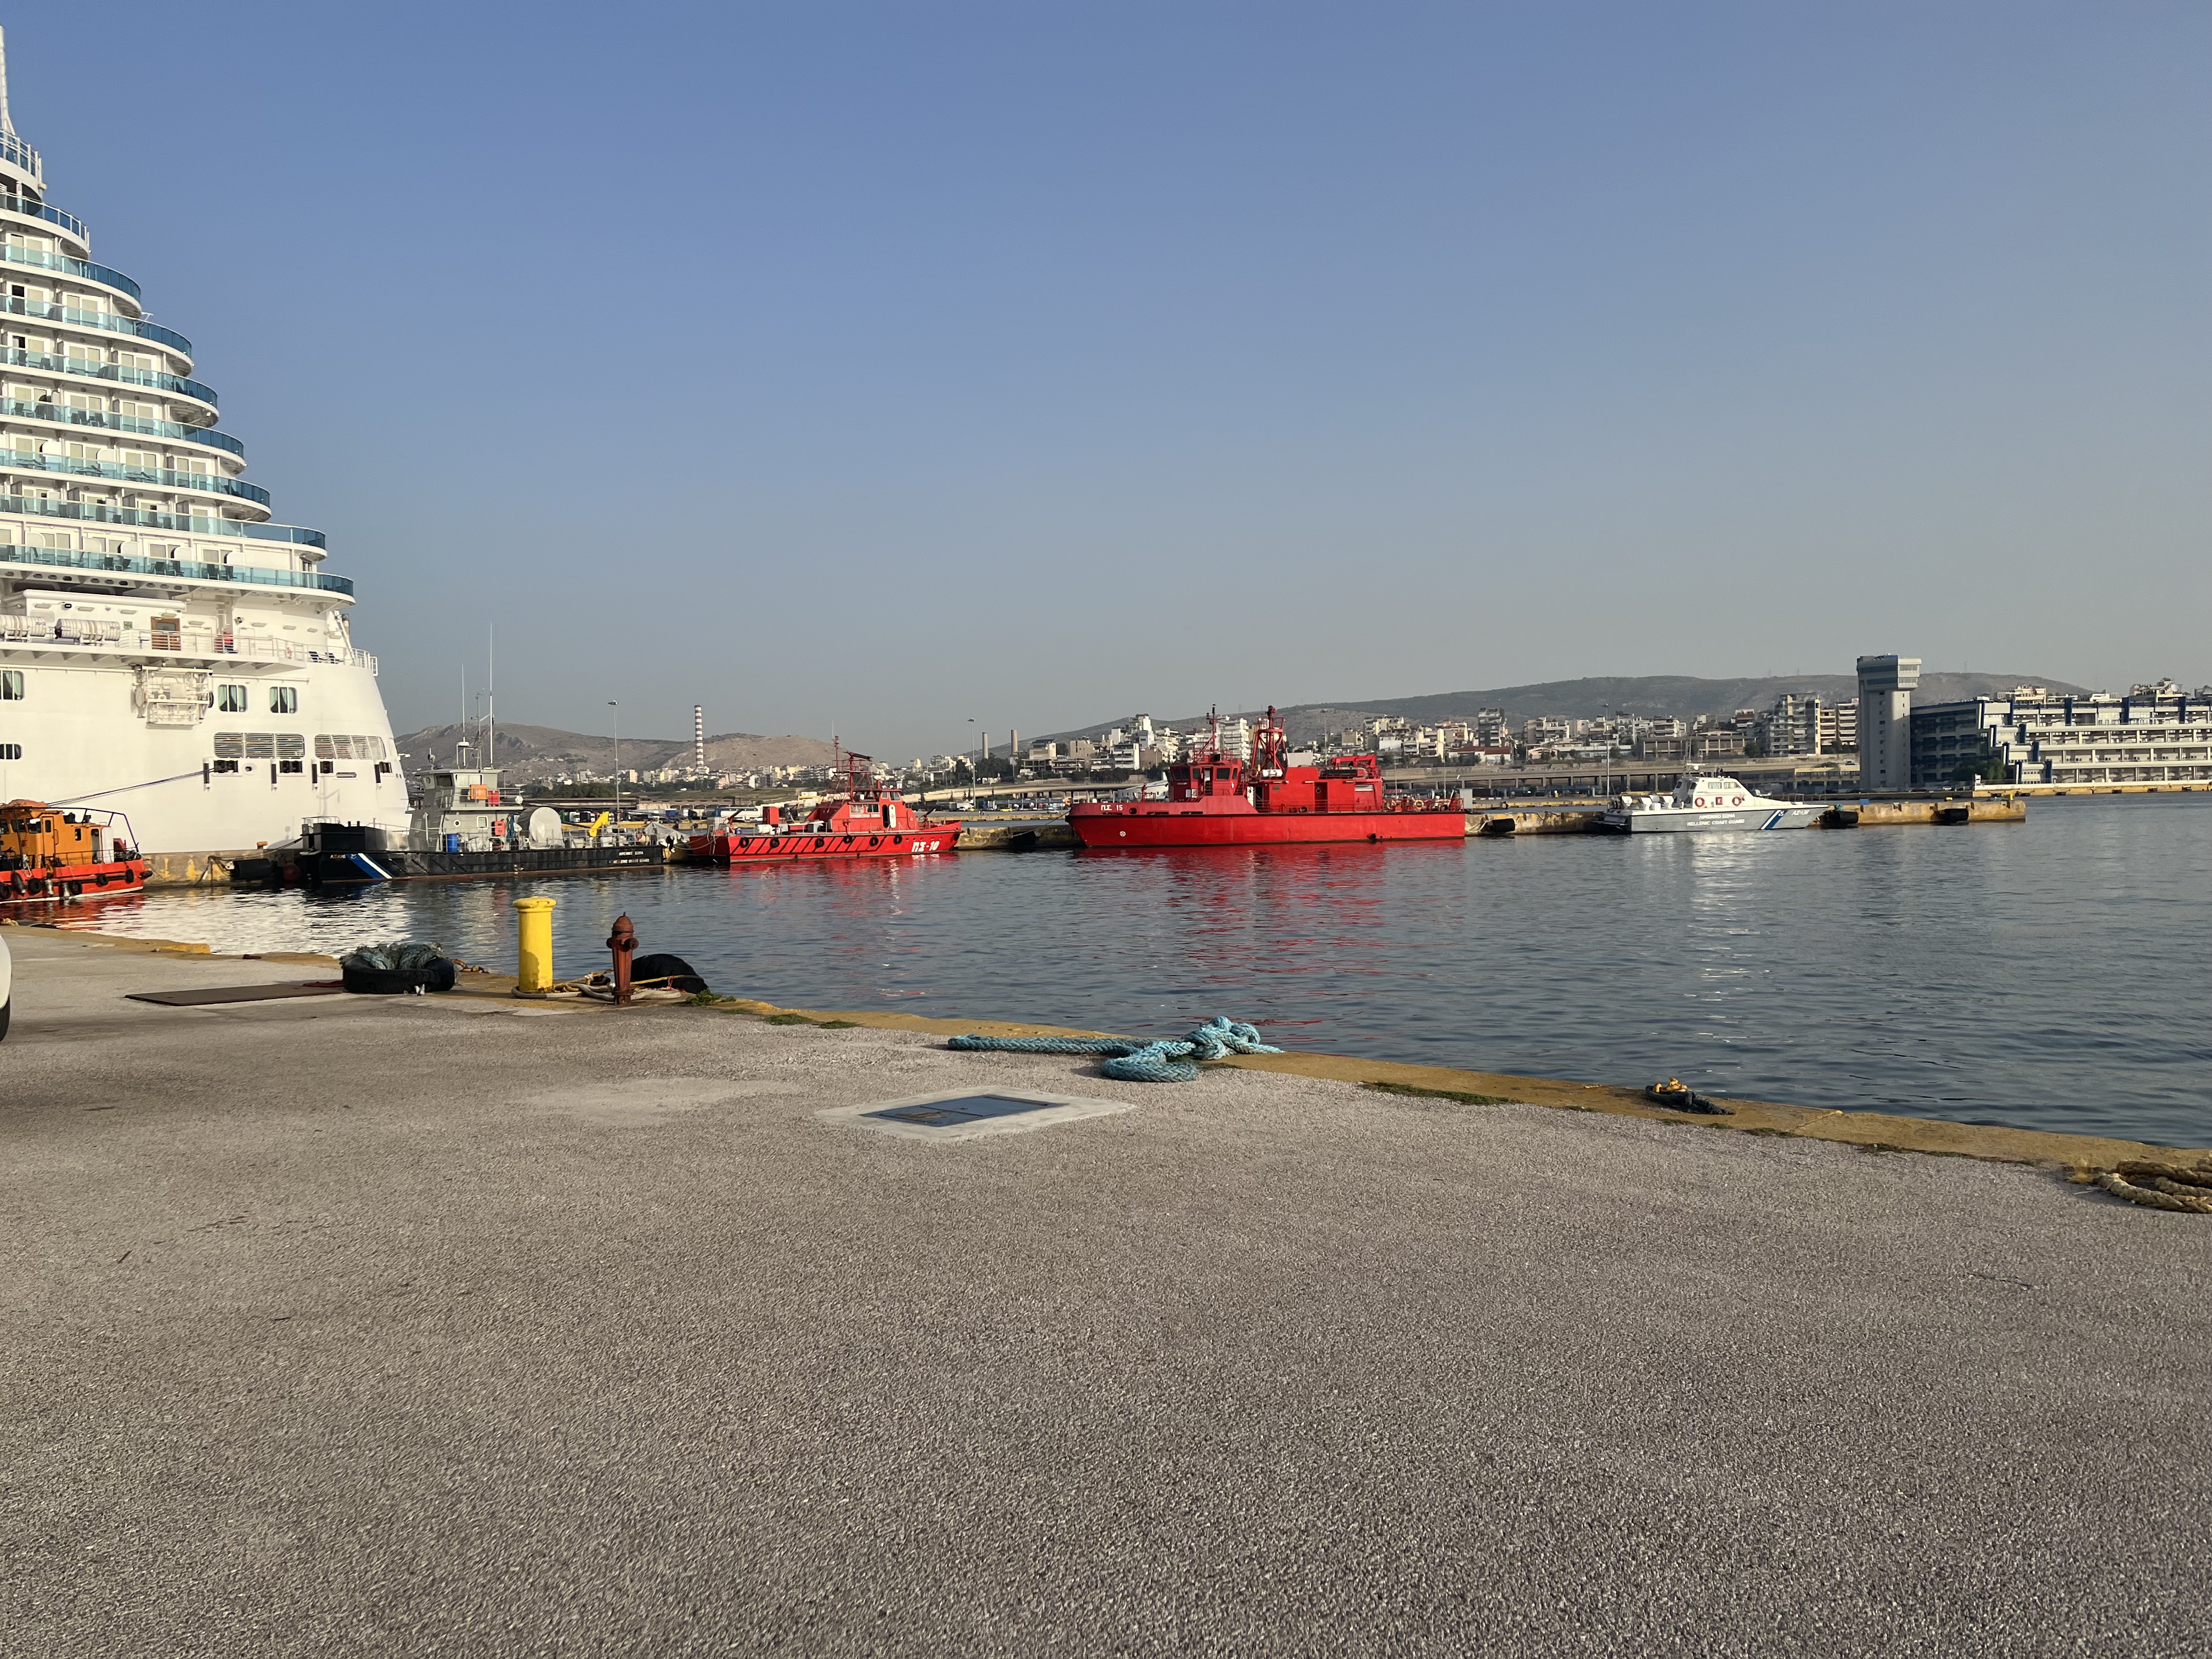 Training Academy of Bureau Veritas Hellas MAE delivers Integrated Firefighting Course for Hellenic Fire Fighting Vessels